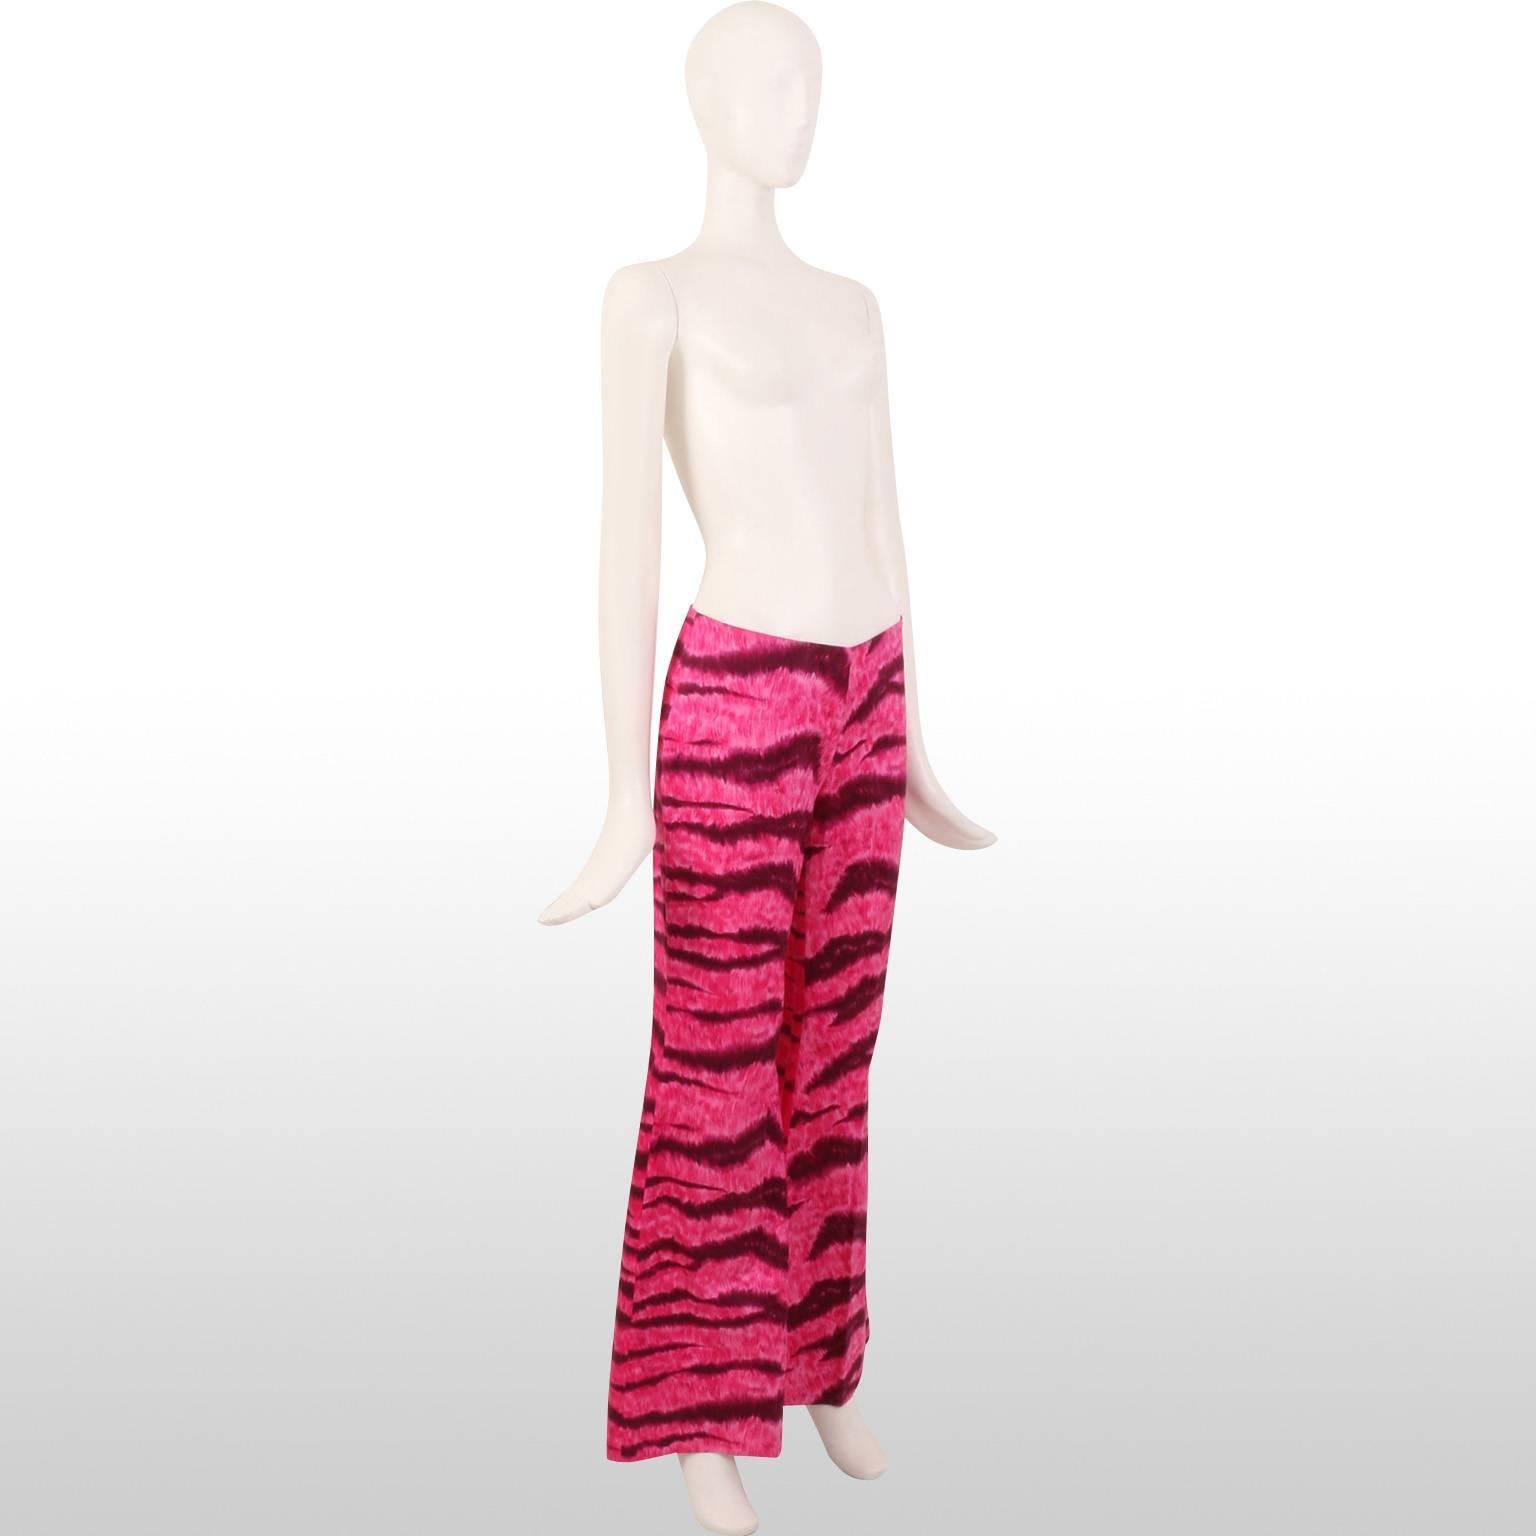 Fun and fabulous Moschino kick flare vibrant fuchsia pink tiger print trousers from the Spring Summer 2000 collection. Sassy and daring, these trousers are a bold fashion statement and a great play on the recent kick flare trend, and ideal for those